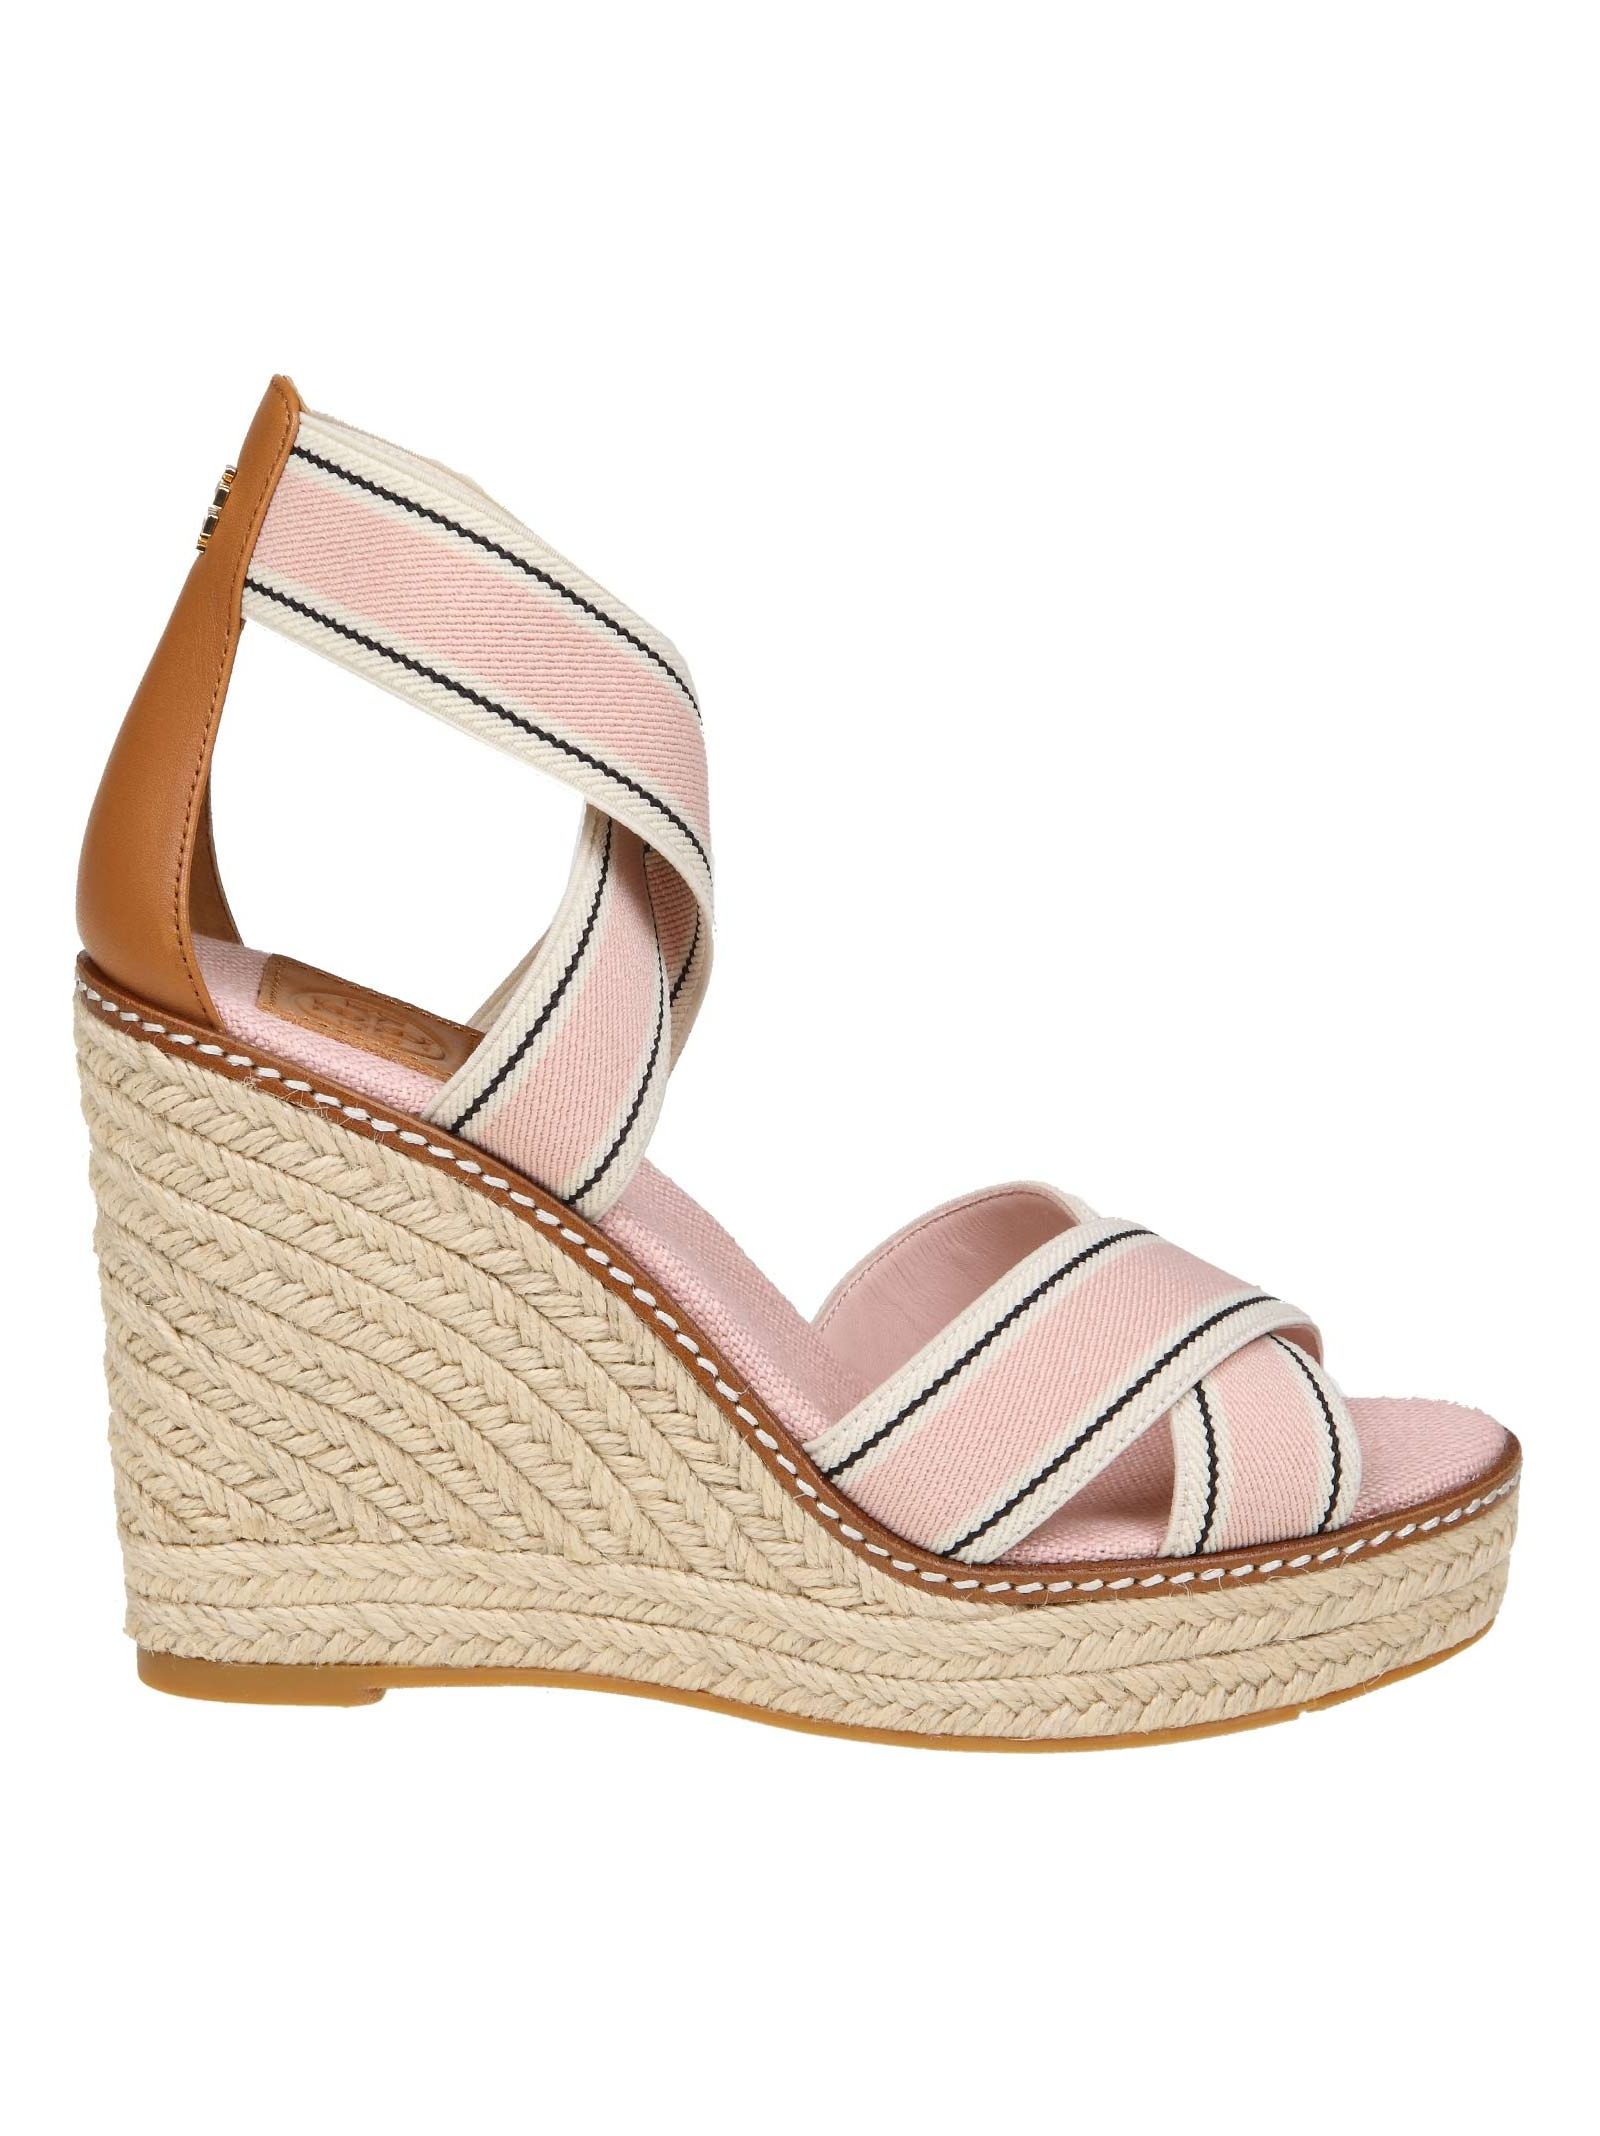 TORY BURCH FRIED SANDAL IN PINK STRETCH FABRIC,10887031